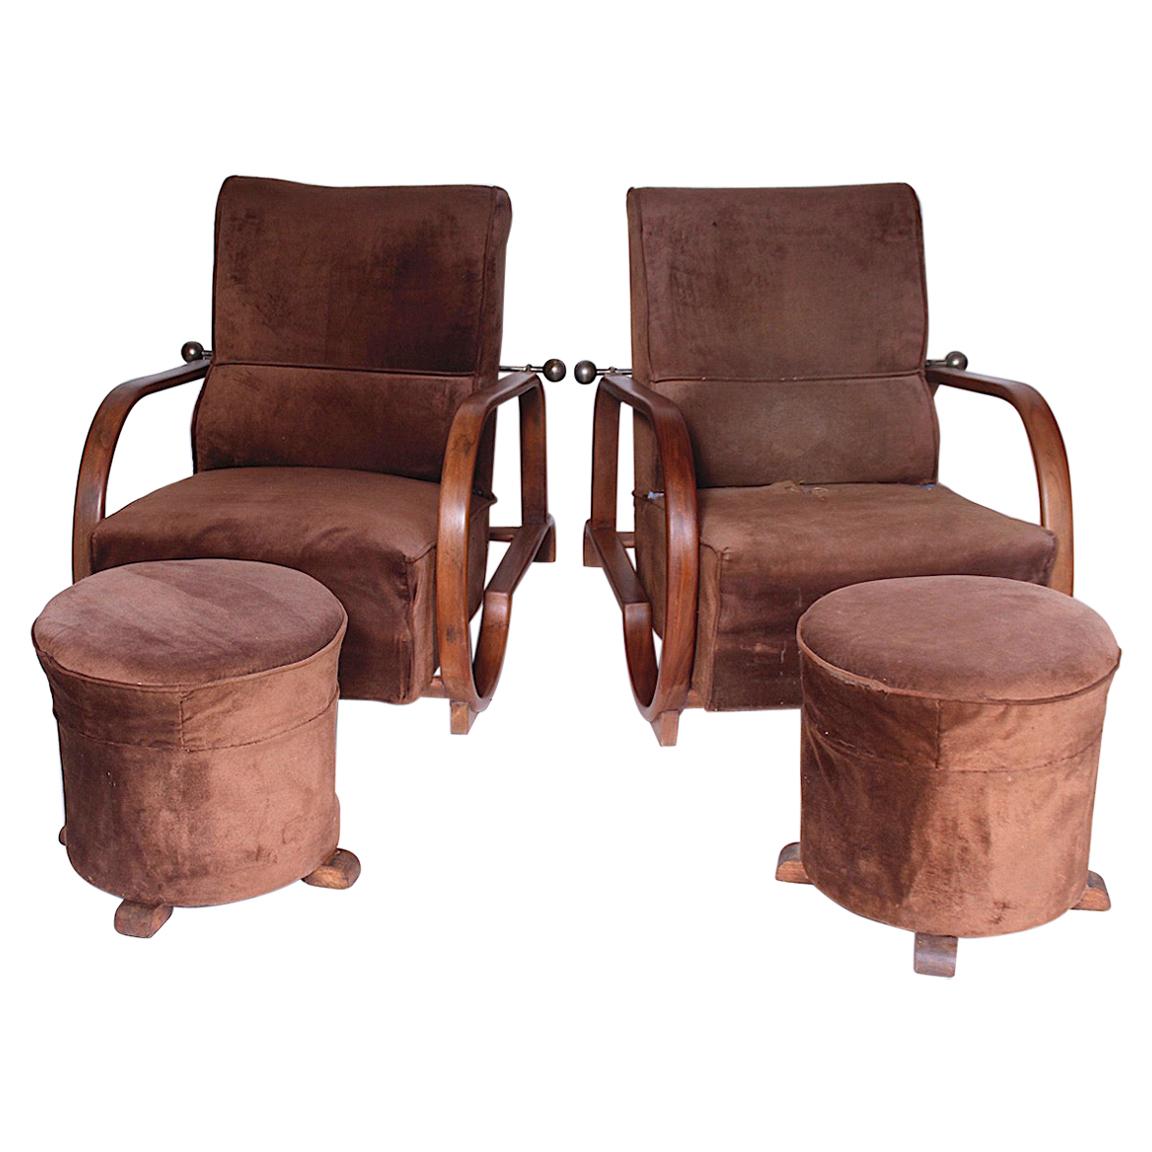 Set of Two Rare Art Deco Armchairs with Footstools, 1920s For Sale